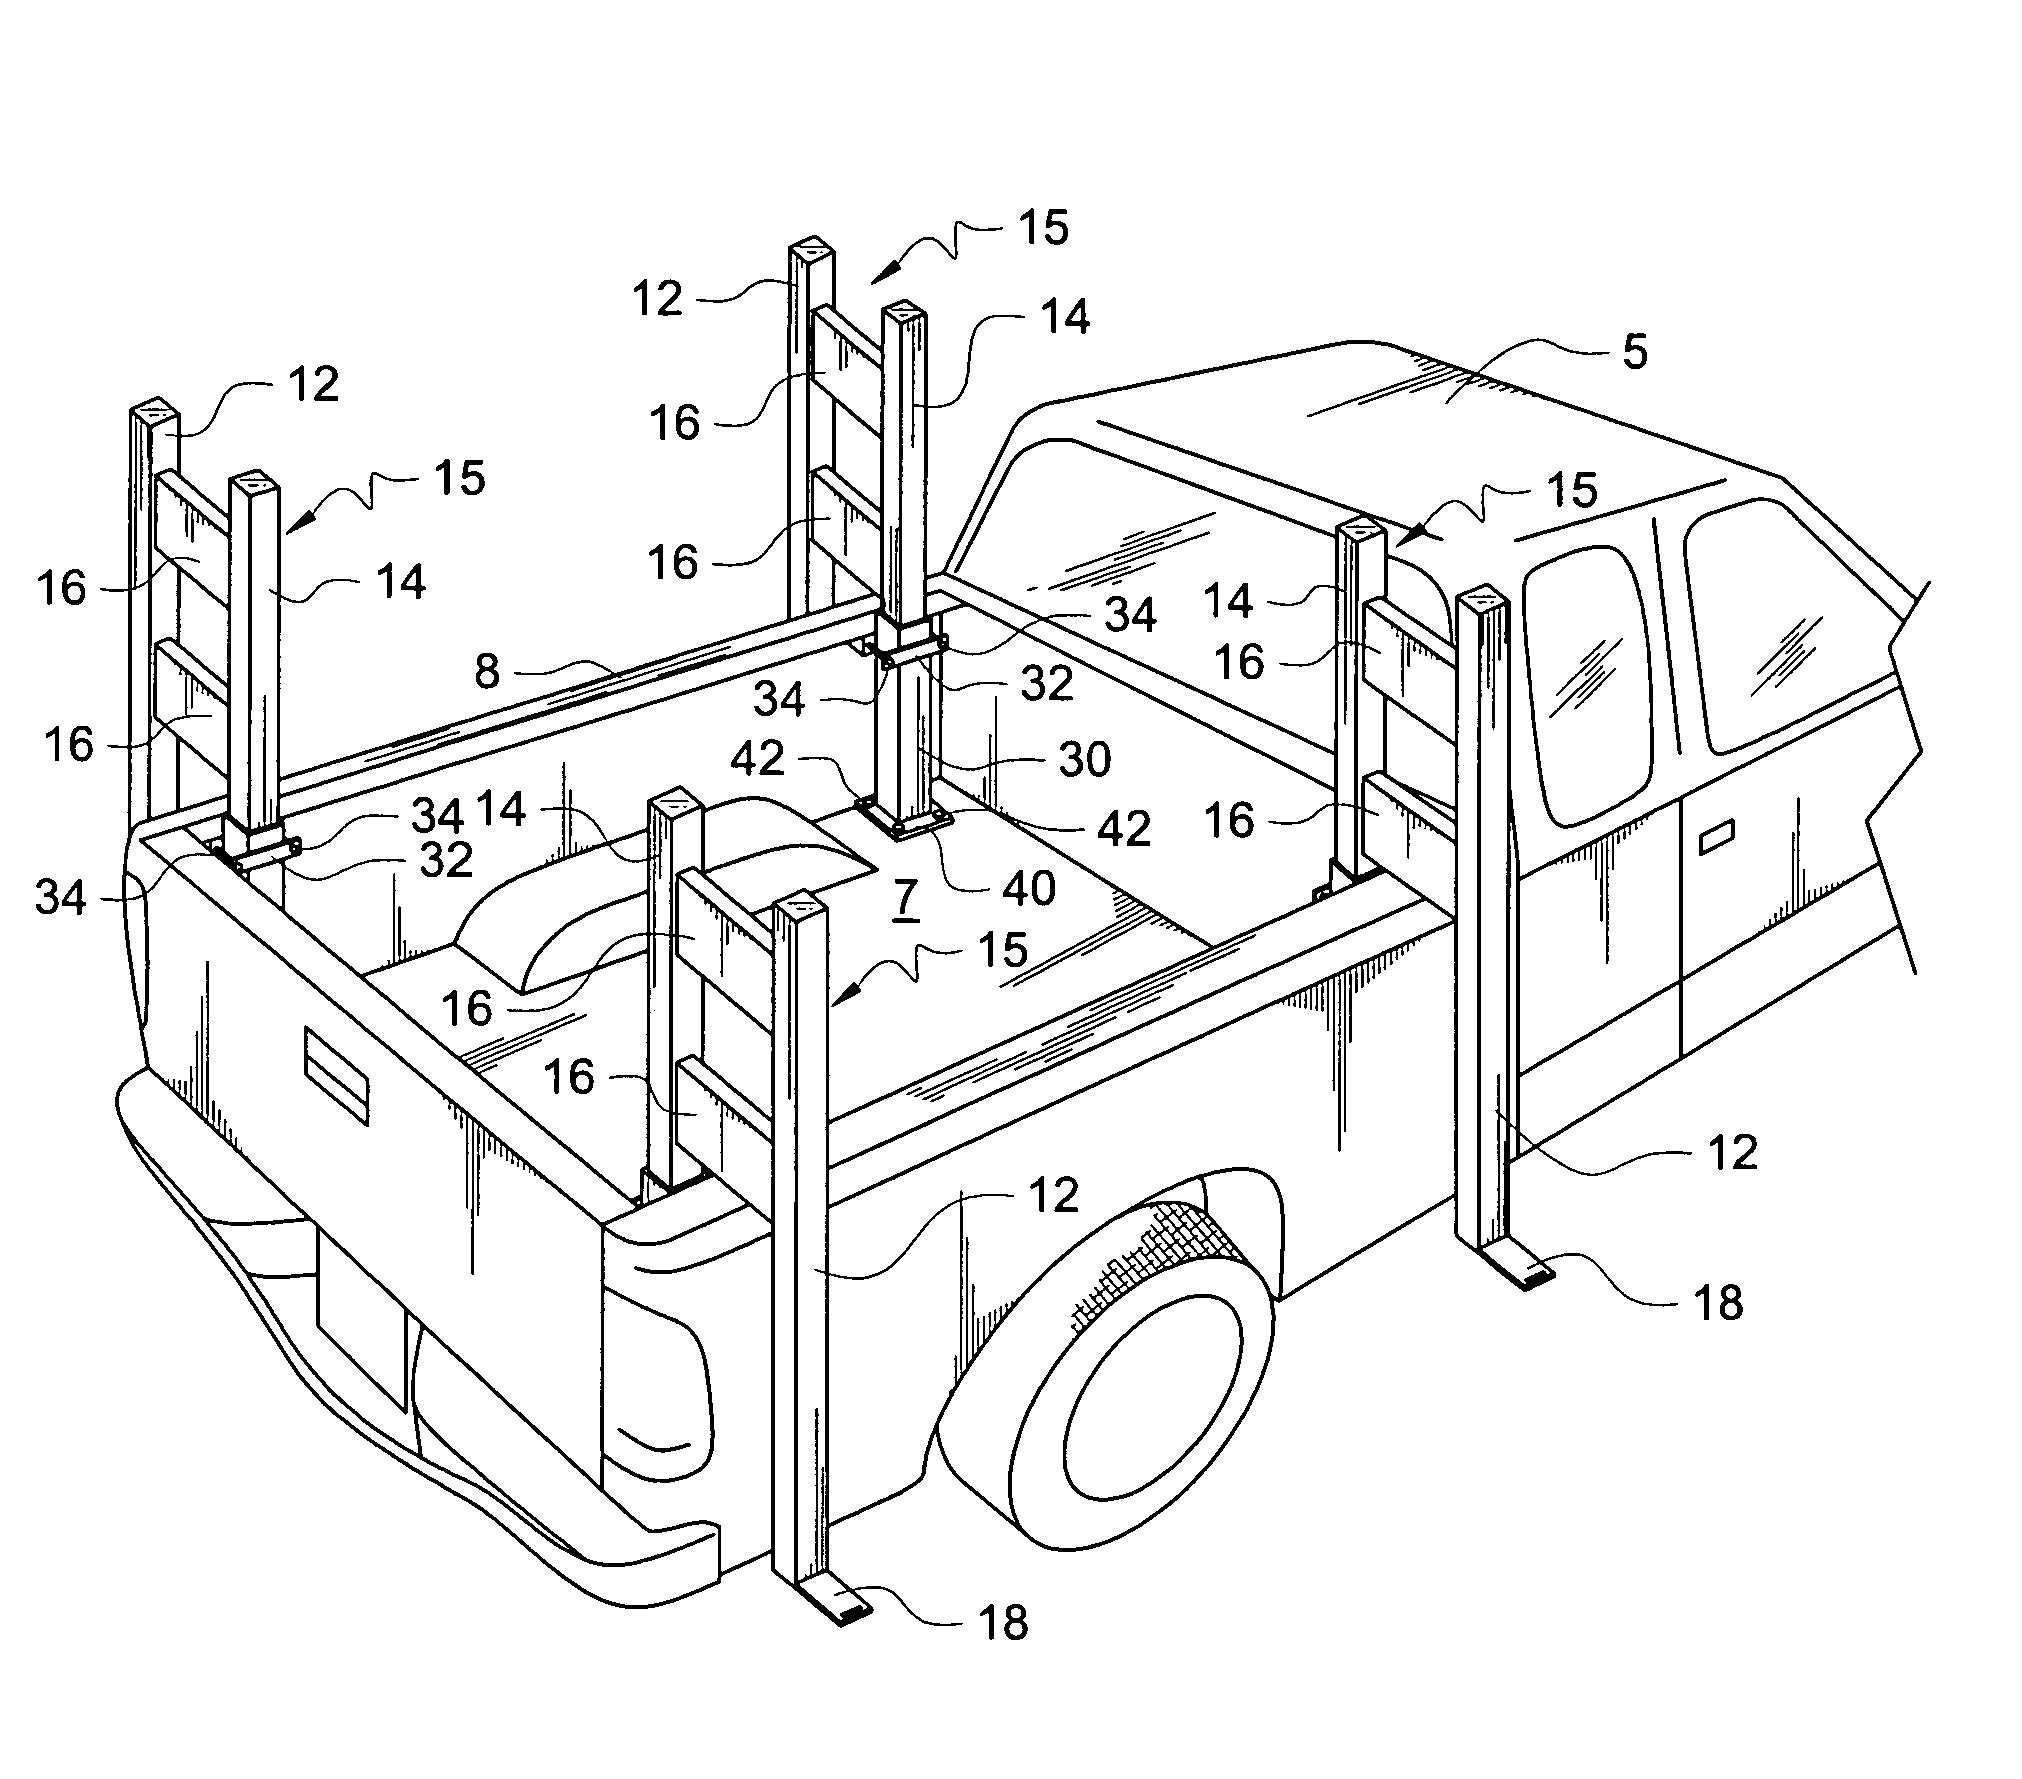 Method and apparatus for transporting planar sheets of material